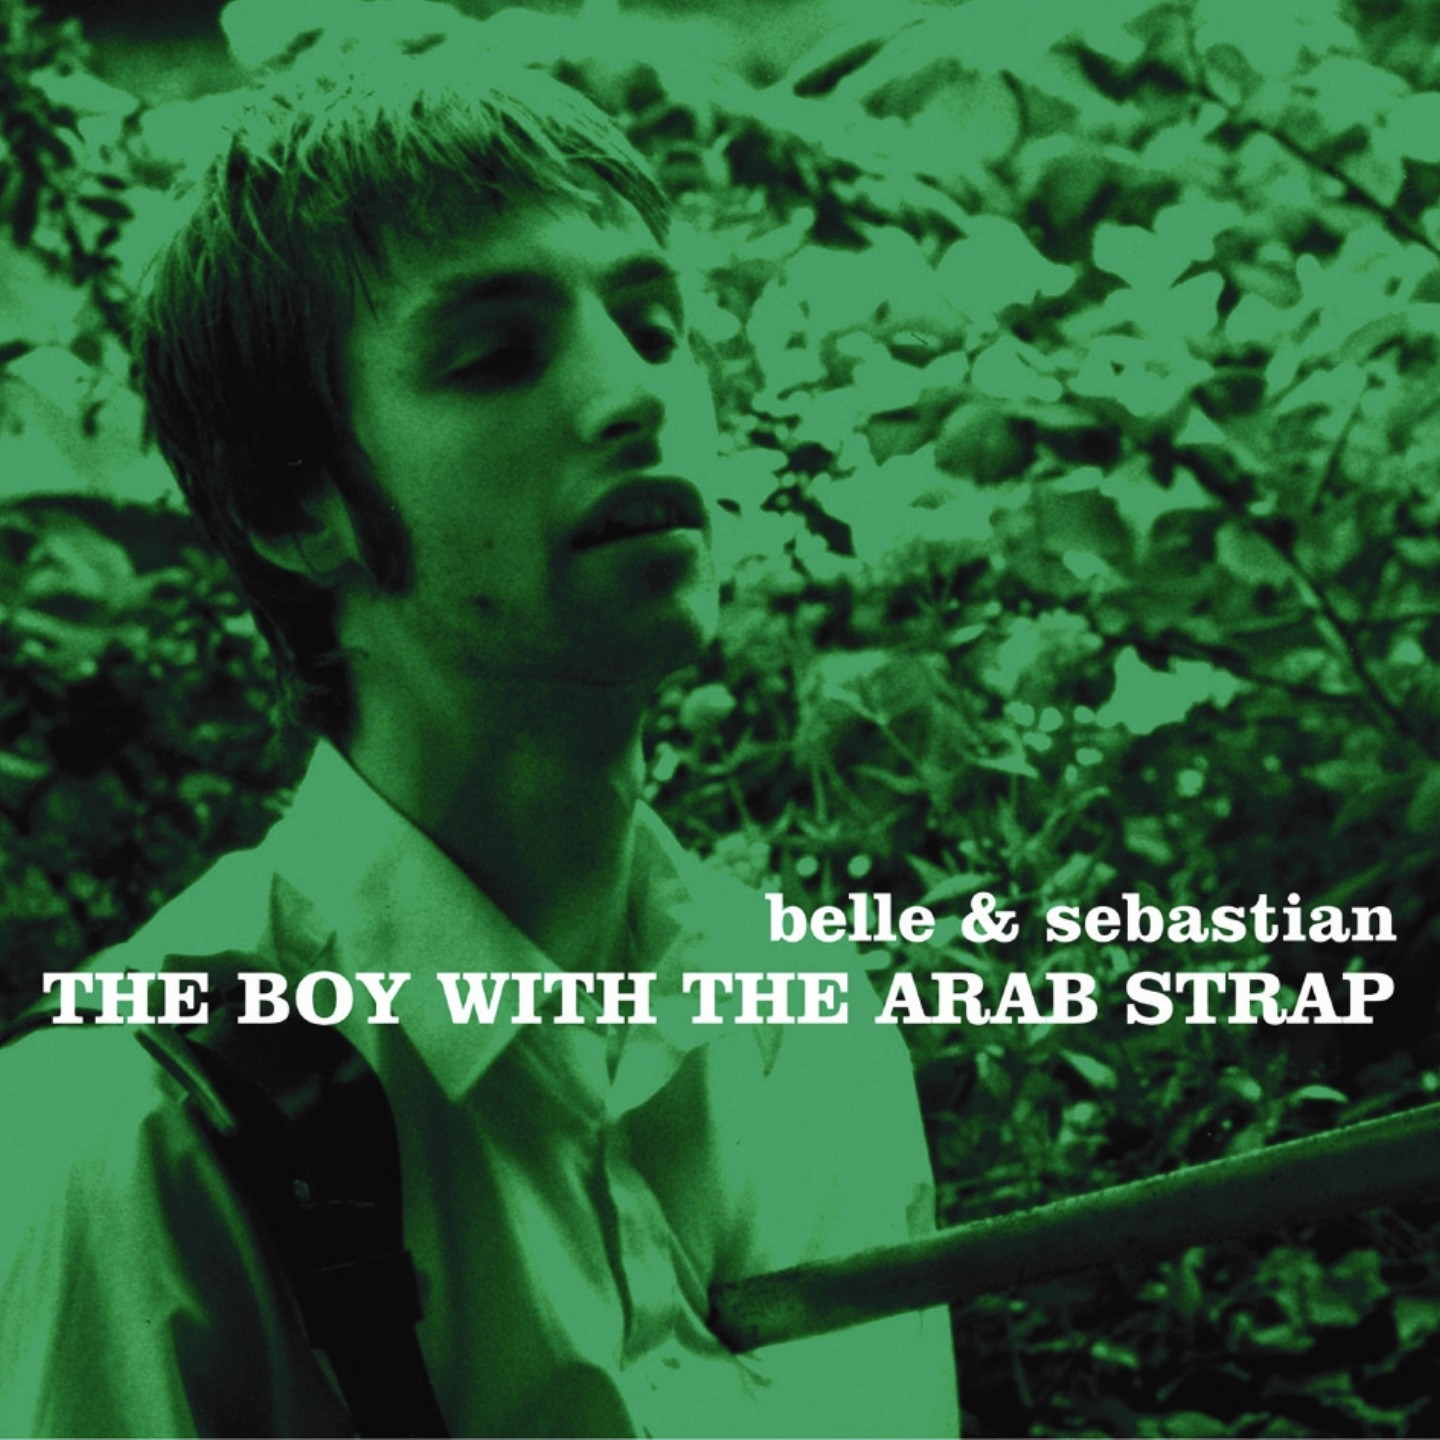 Ranked: Belle and Sebastian's Greatest Albums